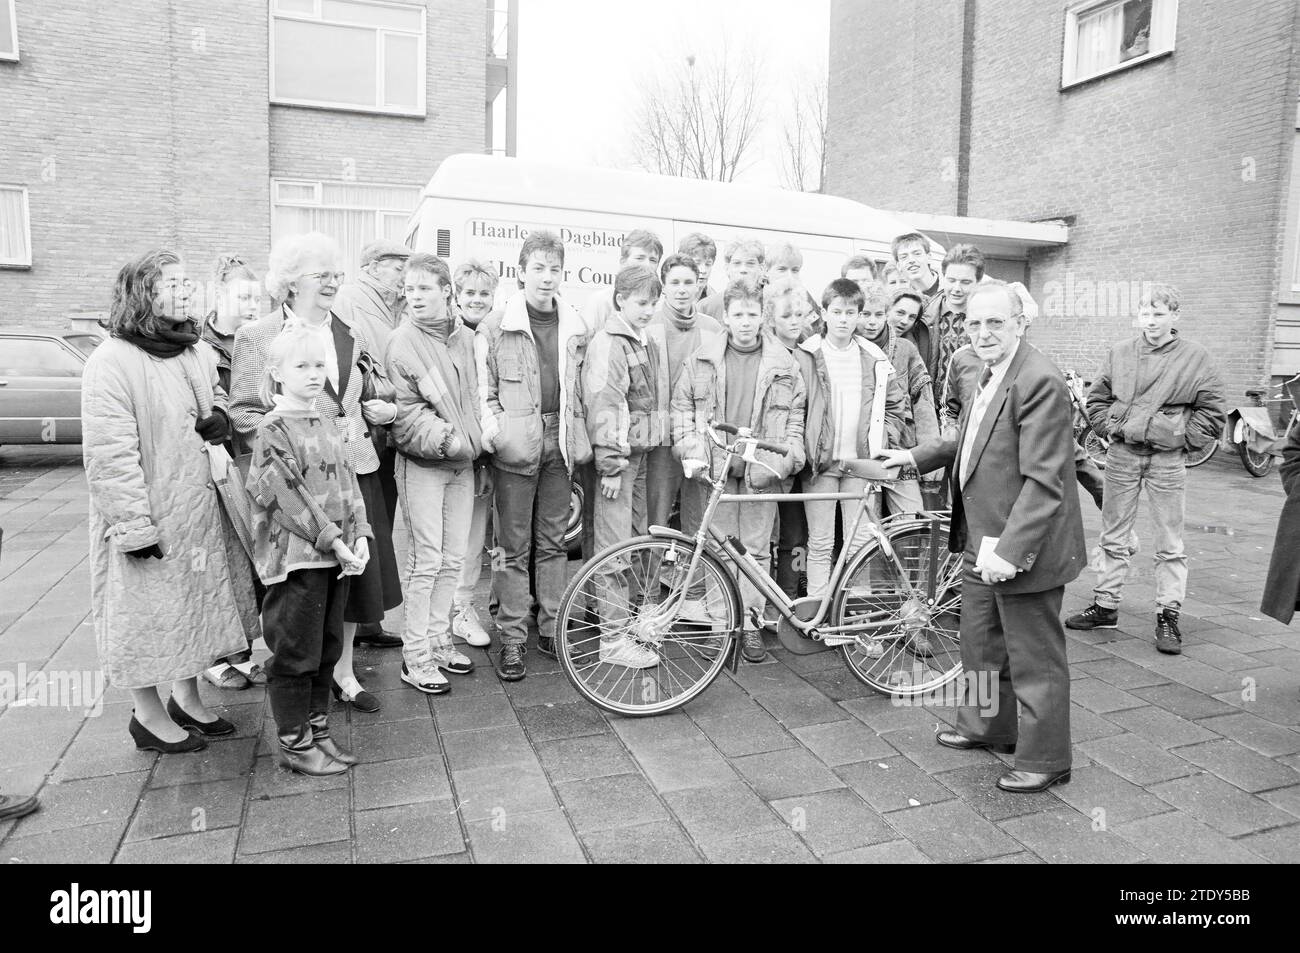 Farewell to main delivery person HD distribution post Staalstraat, Haarlems Dagblad, etc. and IJmuider Courant and Koeri, Haarlem, Staalstraat, The Netherlands, 29-01-1988, Whizgle News from the Past, Tailored for the Future. Explore historical narratives, Dutch The Netherlands agency image with a modern perspective, bridging the gap between yesterday's events and tomorrow's insights. A timeless journey shaping the stories that shape our future. Stock Photo